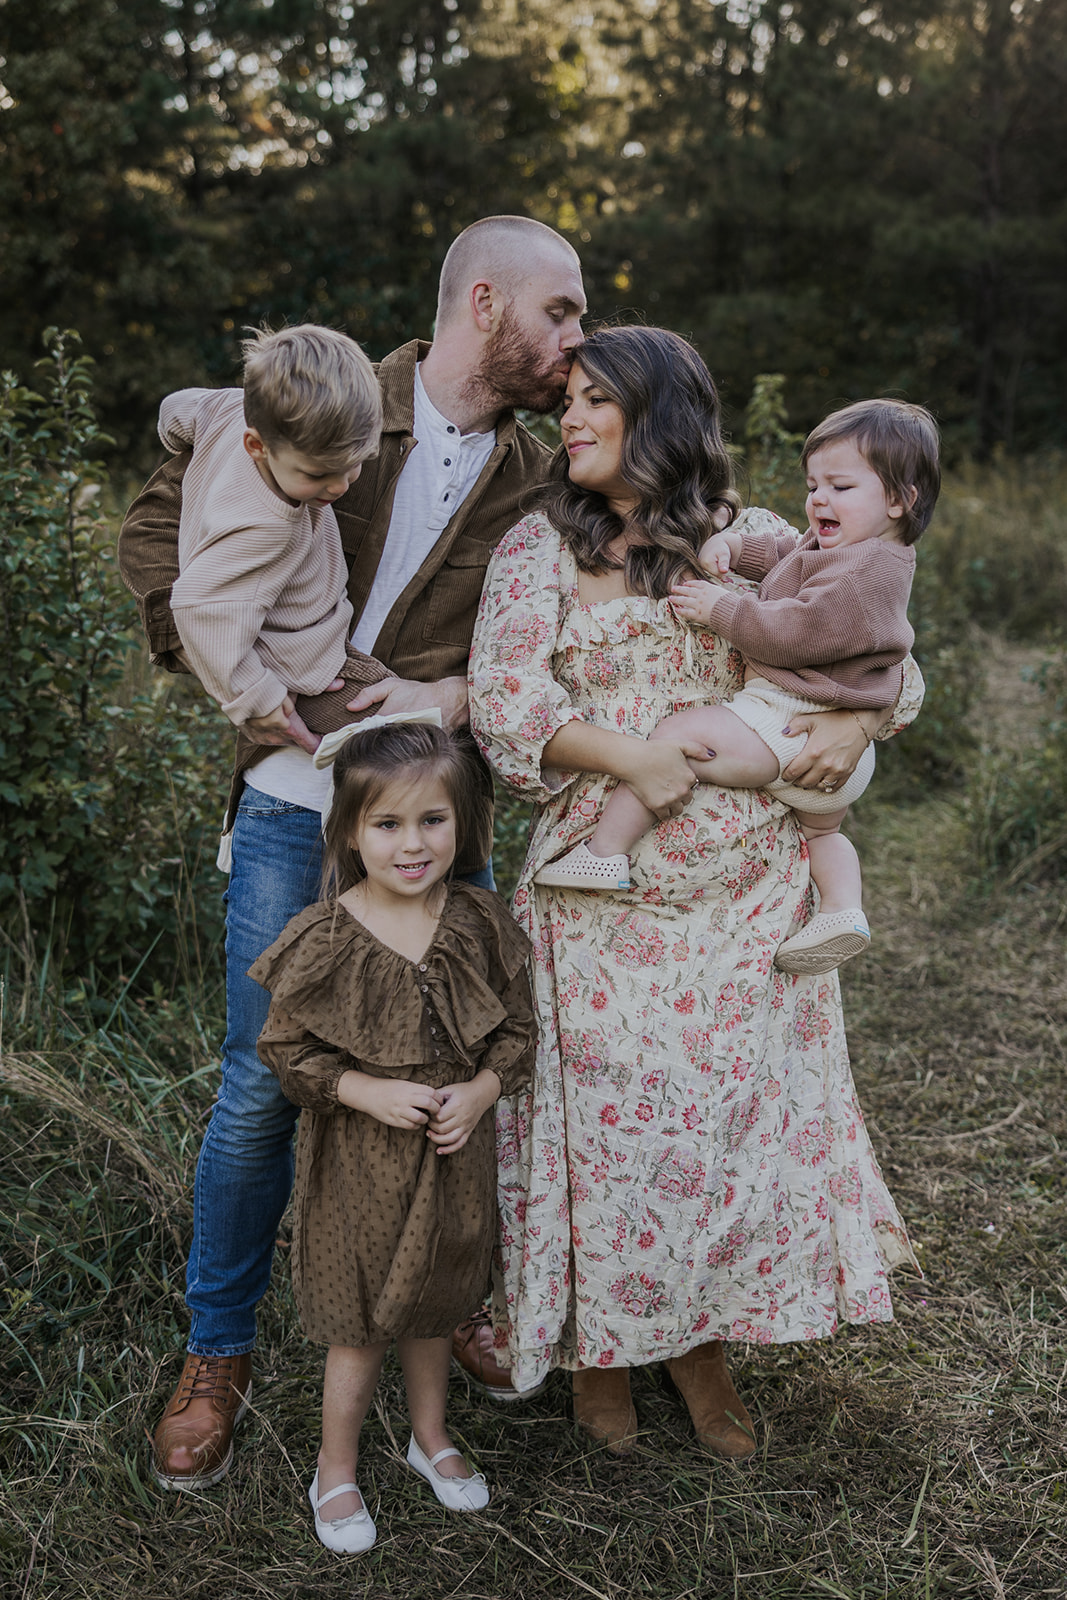 mom and dad pose together with their kids during her families Georgia photoshoot